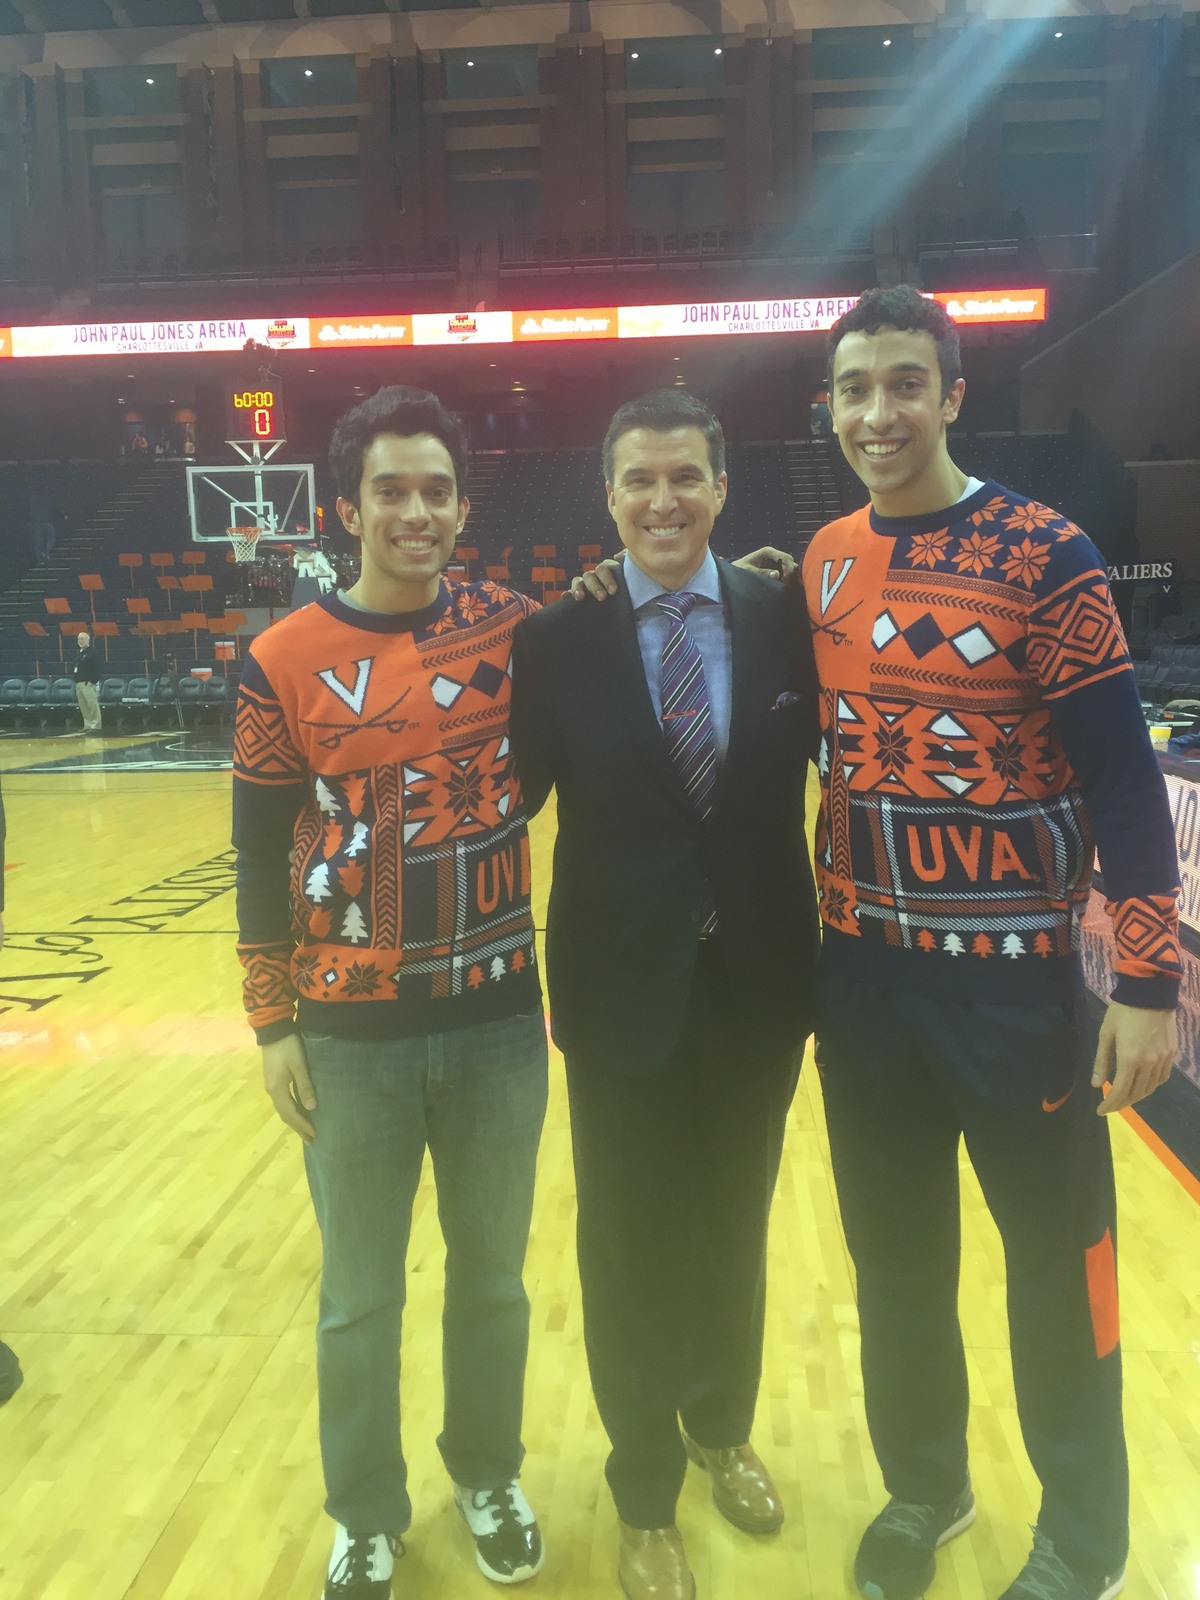 Mikey Carpenter, Rece Davis, and Johnny Carpenter stand on the basketball court for a picture